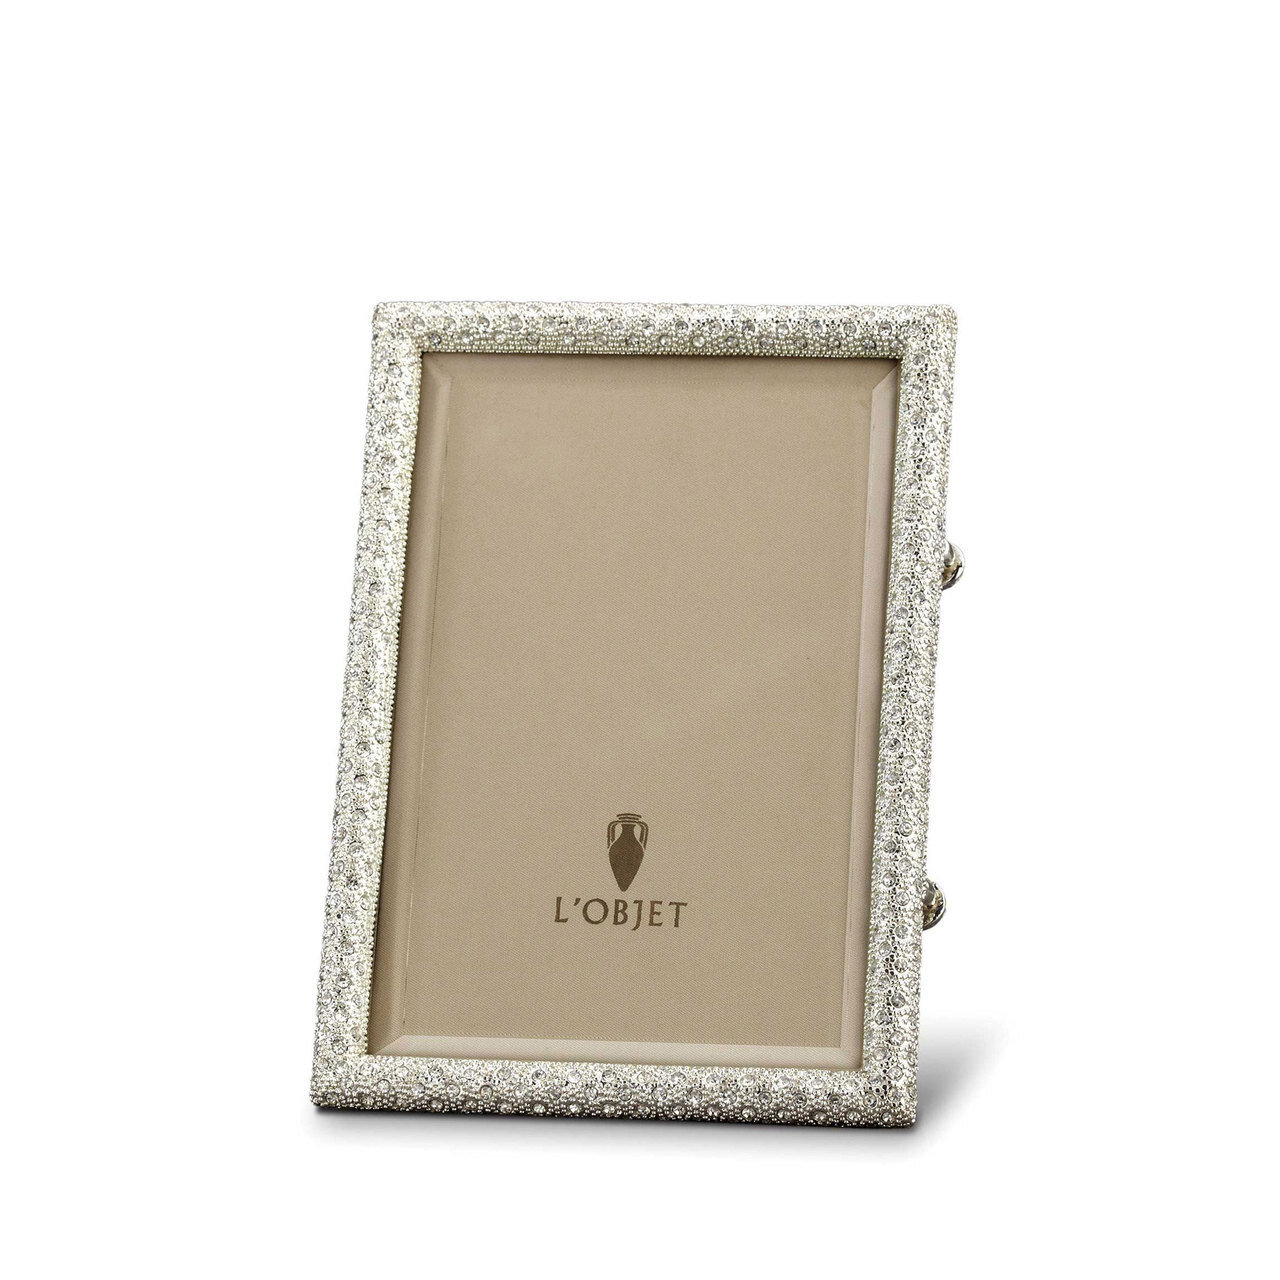 L'Objet Rectangular Pave 4 x 6 Inch Platinum with White Crystals Picture Frame